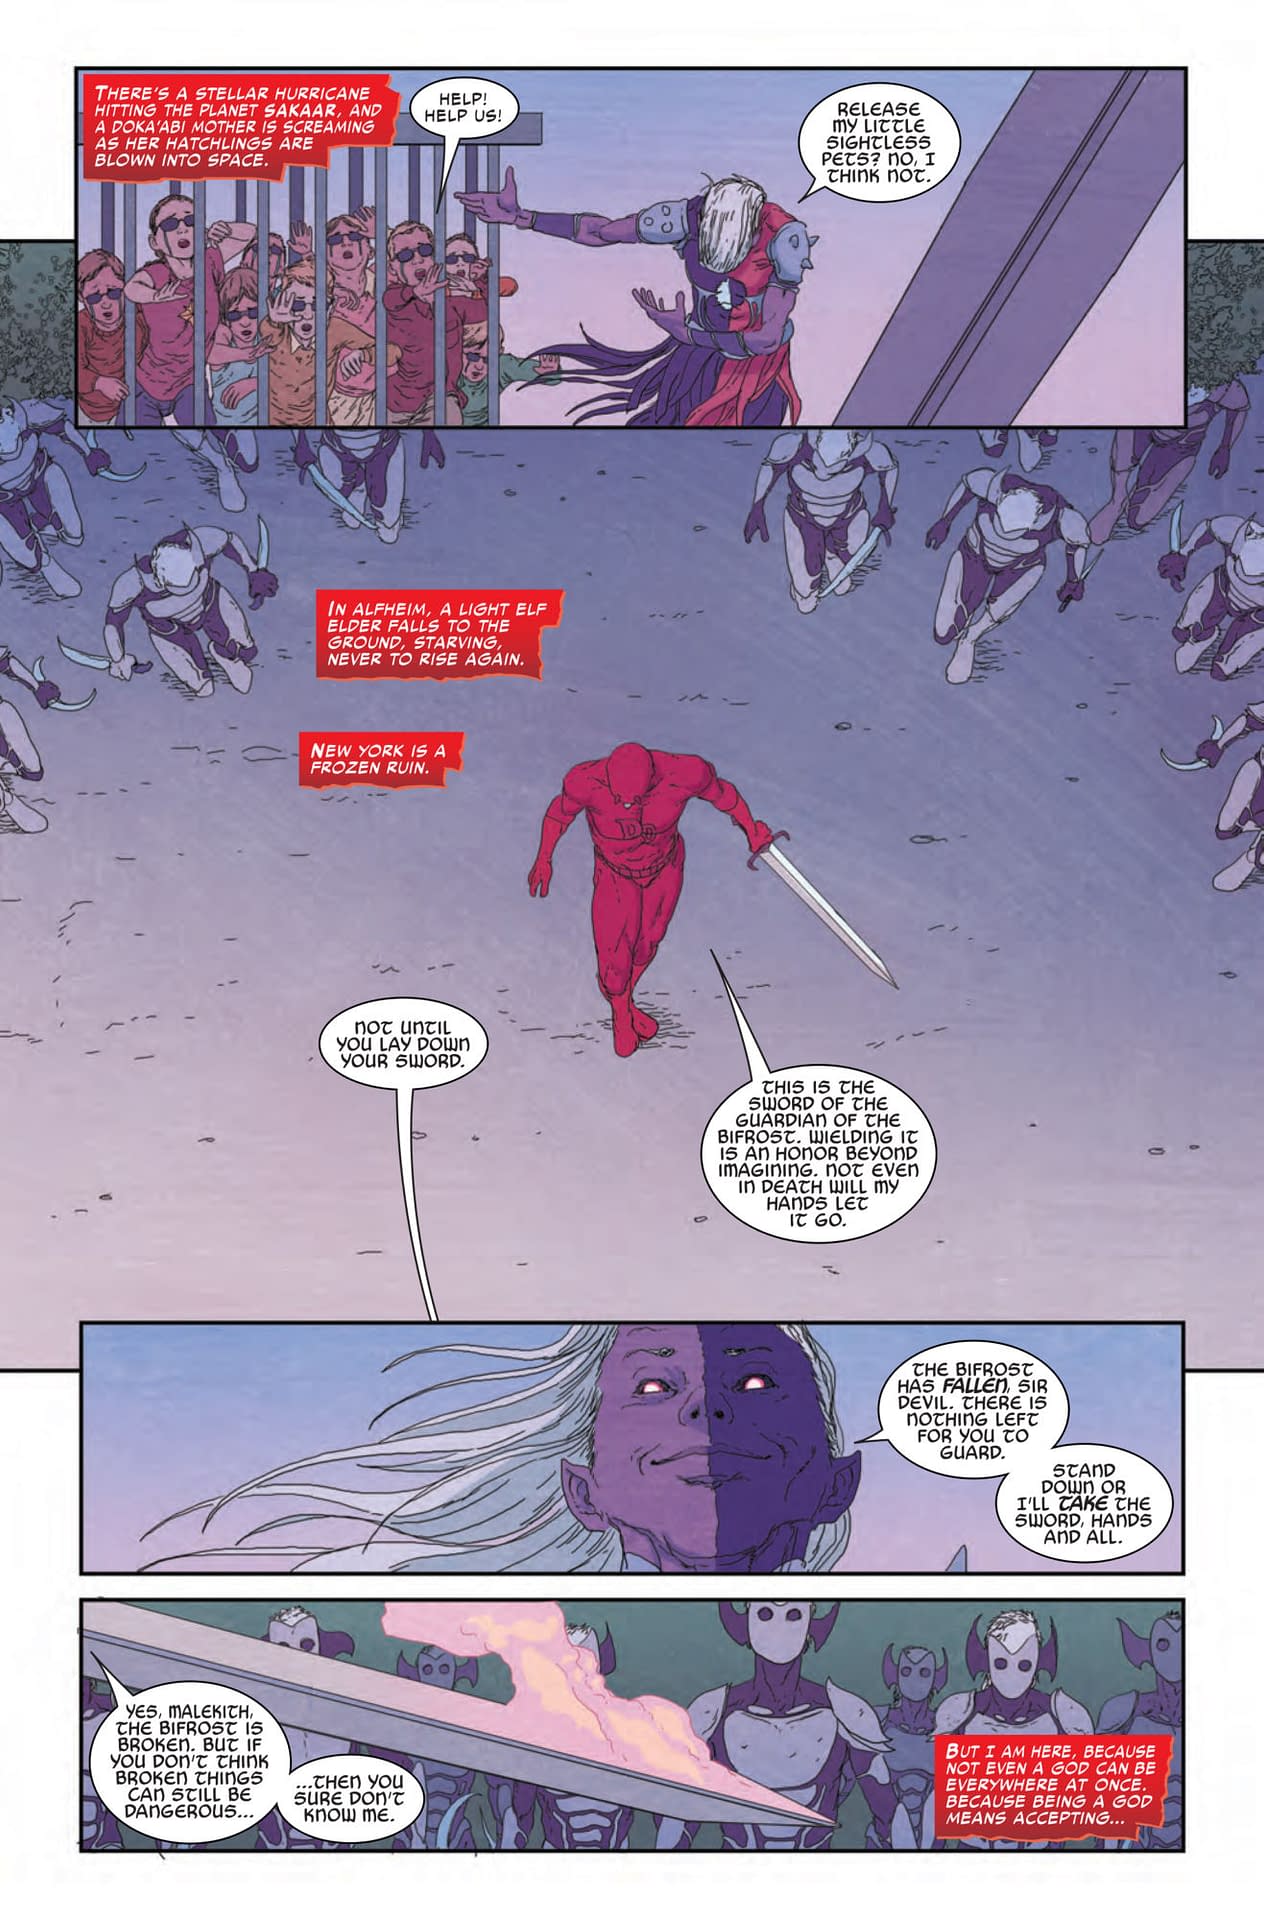 Daredevil Gains an Unfair Advantage in War of the Realms: War Scrolls #3 (Preview)